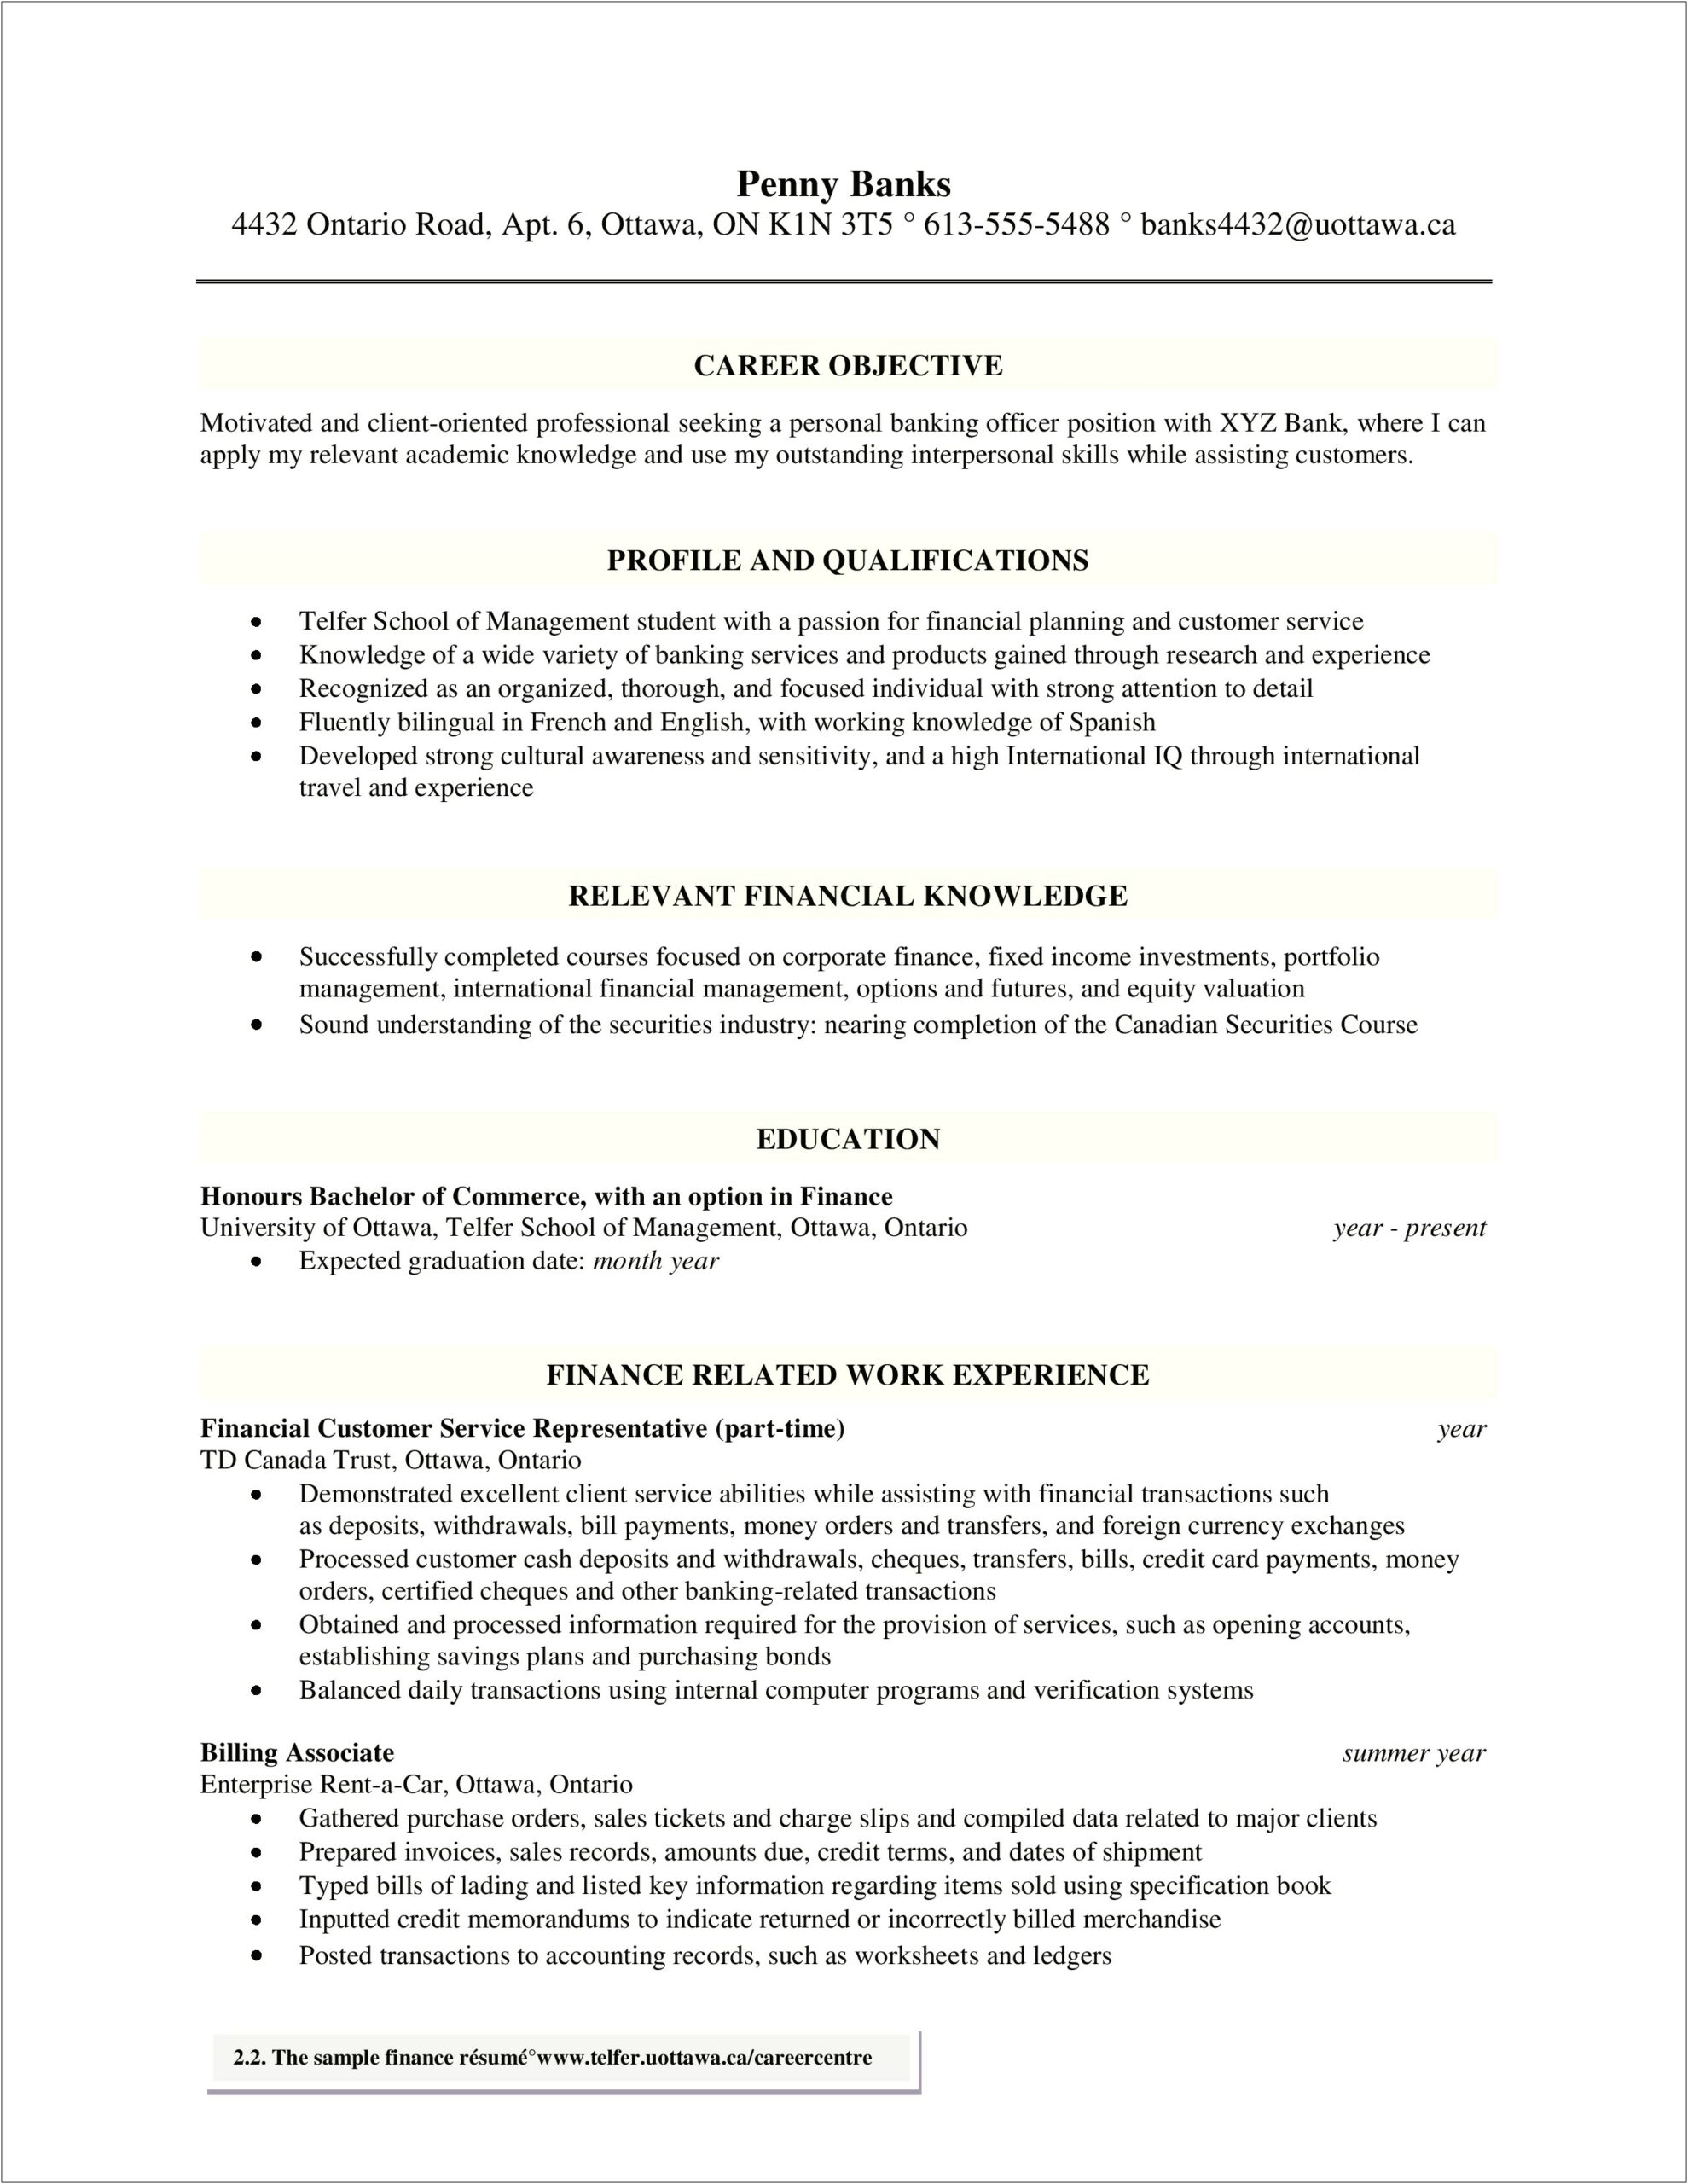 Resumes For Jobs In Customer Service